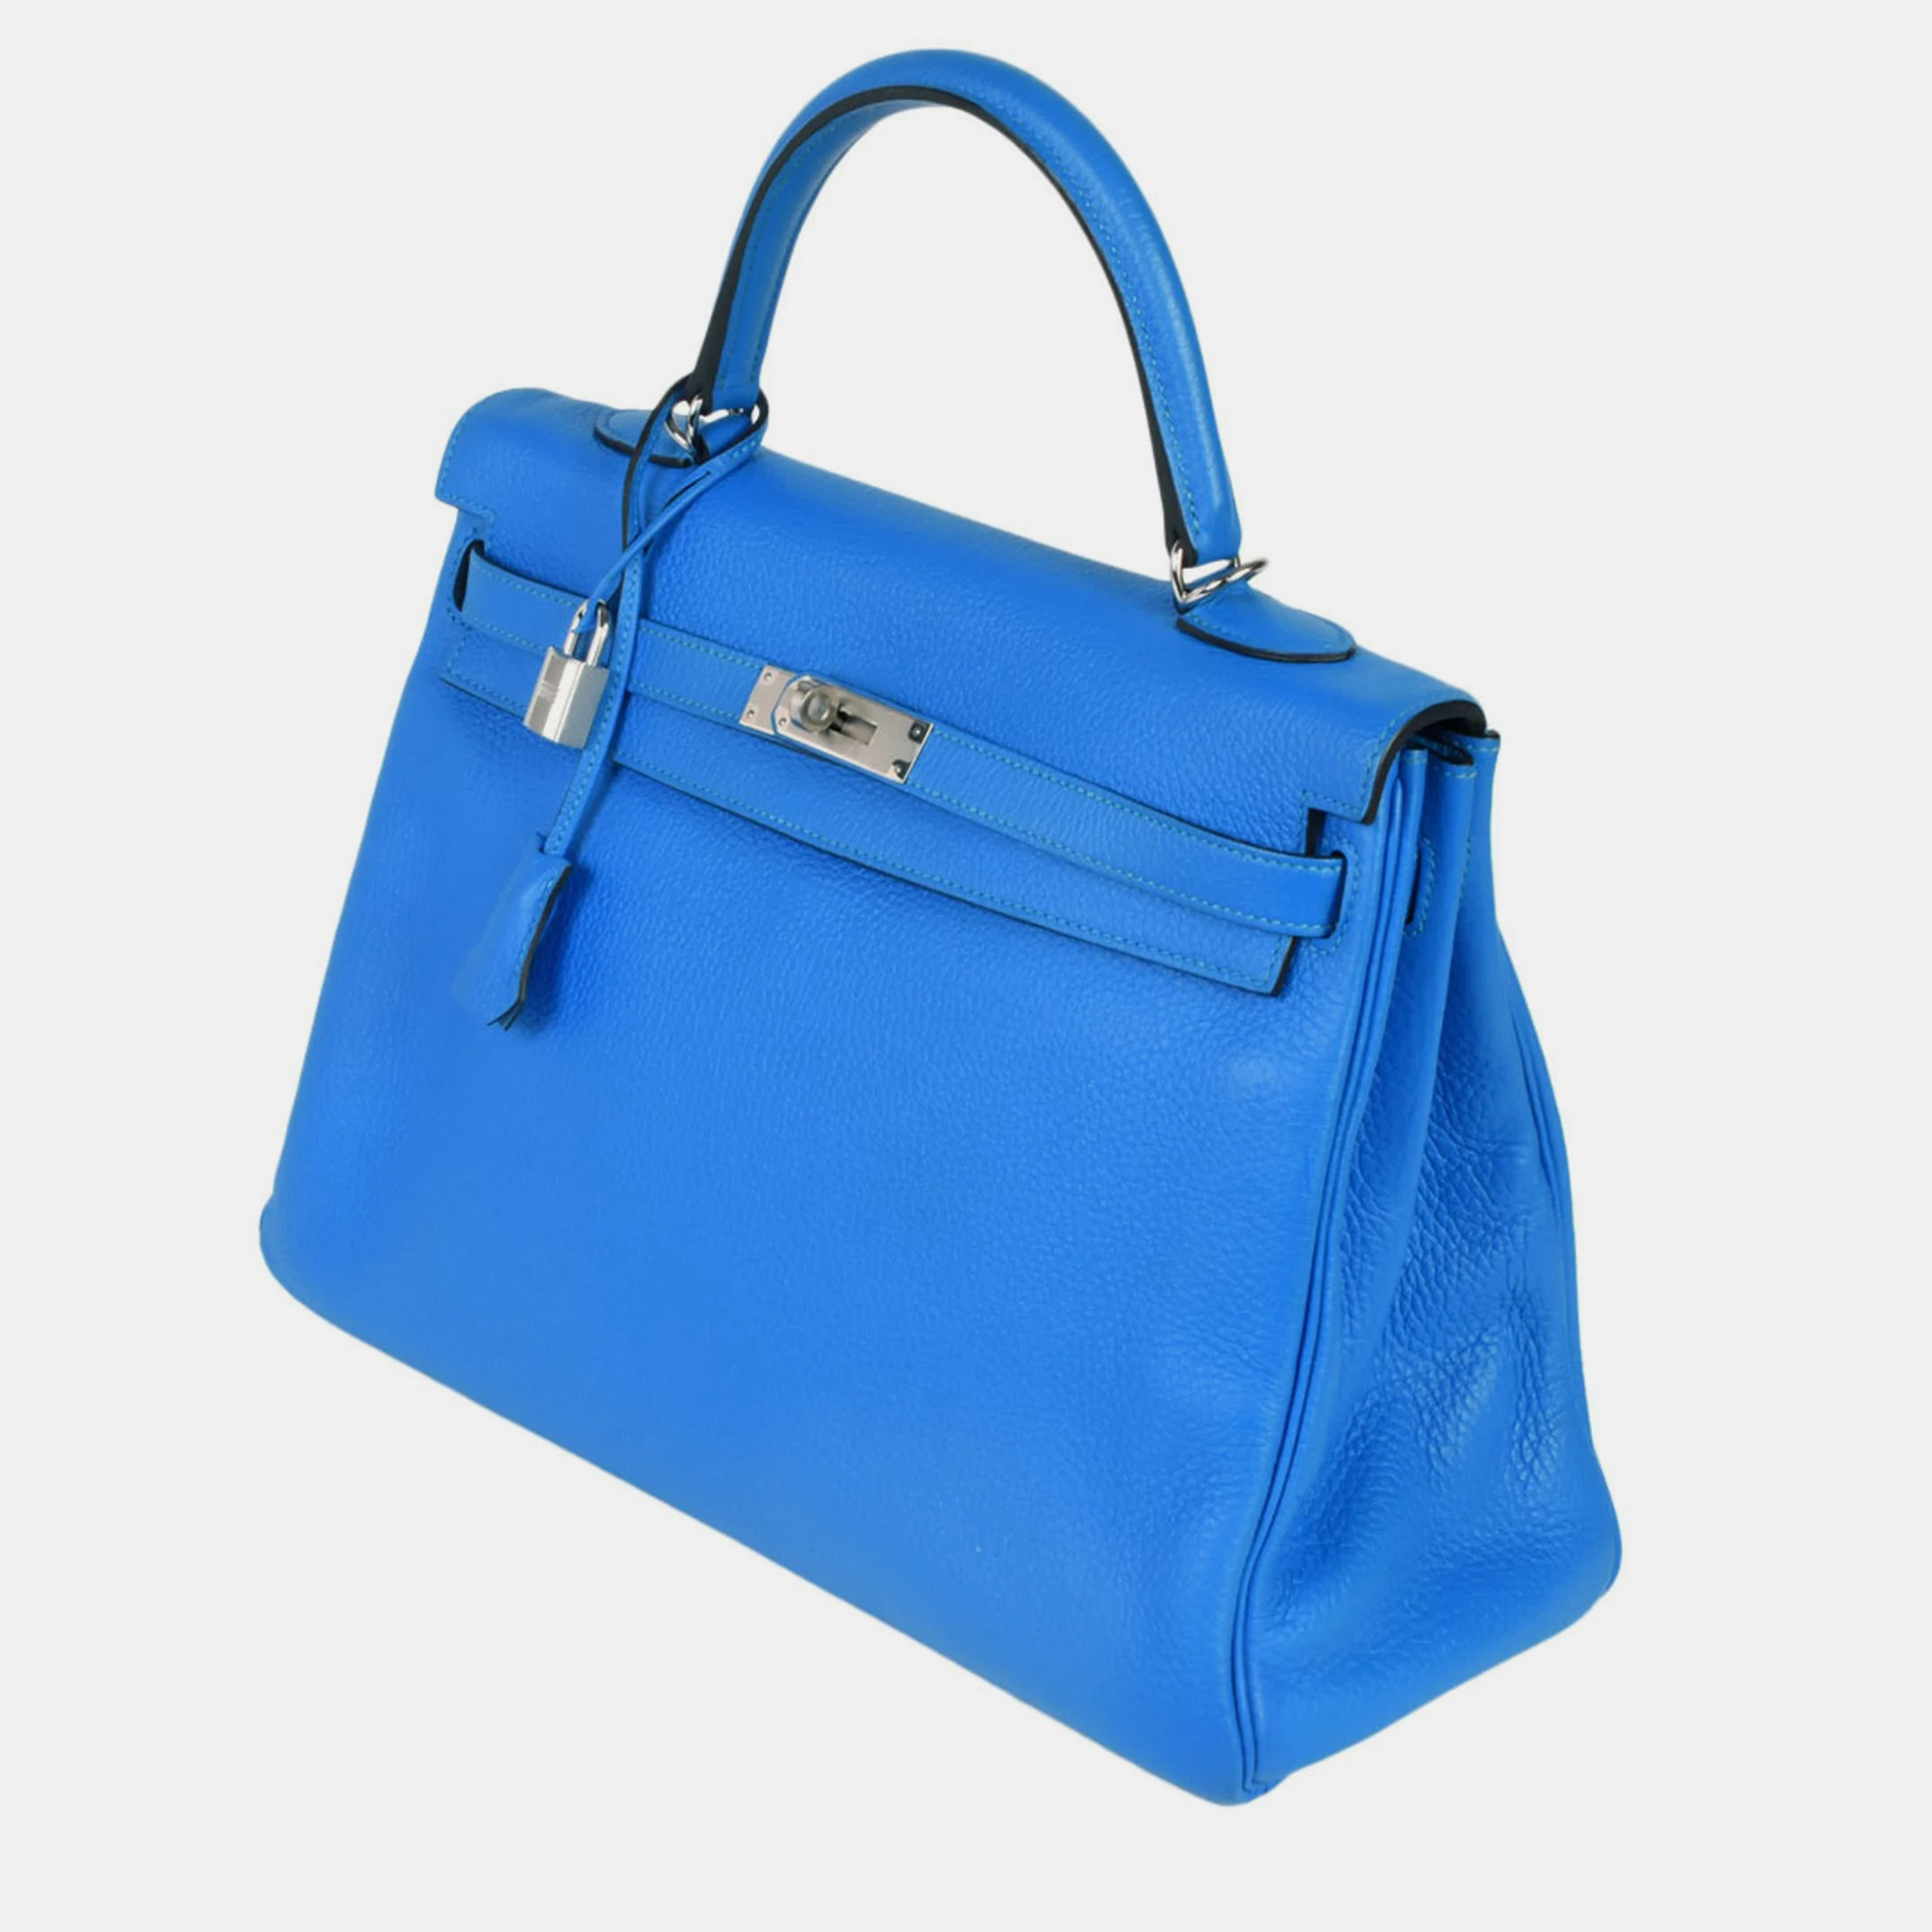 HERMES Kelly 35 Inner Stitch Mykonos Taurillon Clemence R Stamped (manufactured In 2014) Handbag With Strap